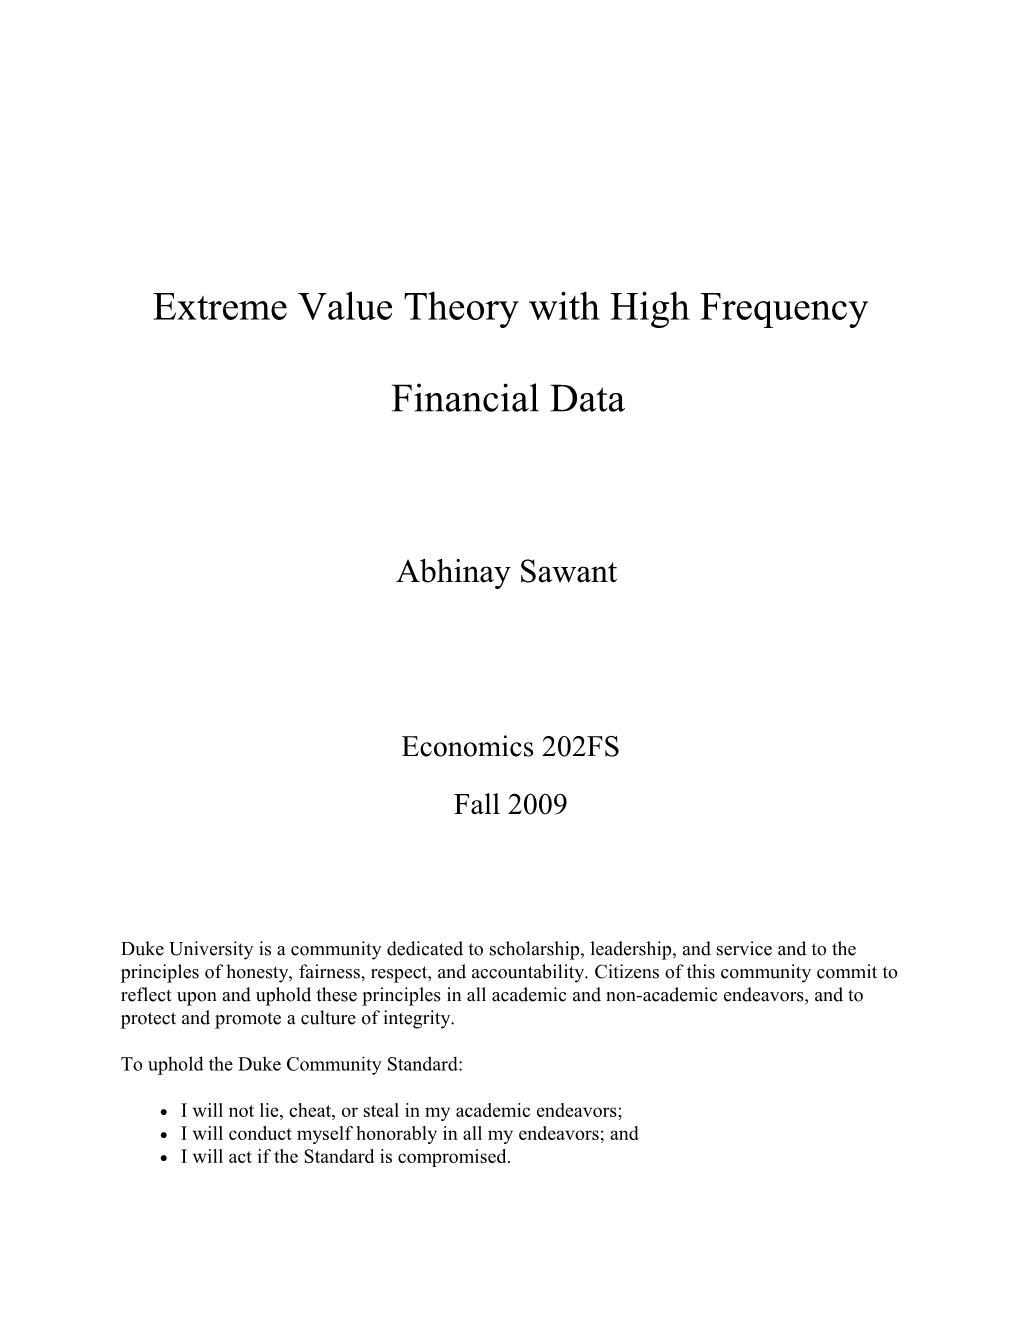 Extreme Value Theory with High Frequency Financial Data